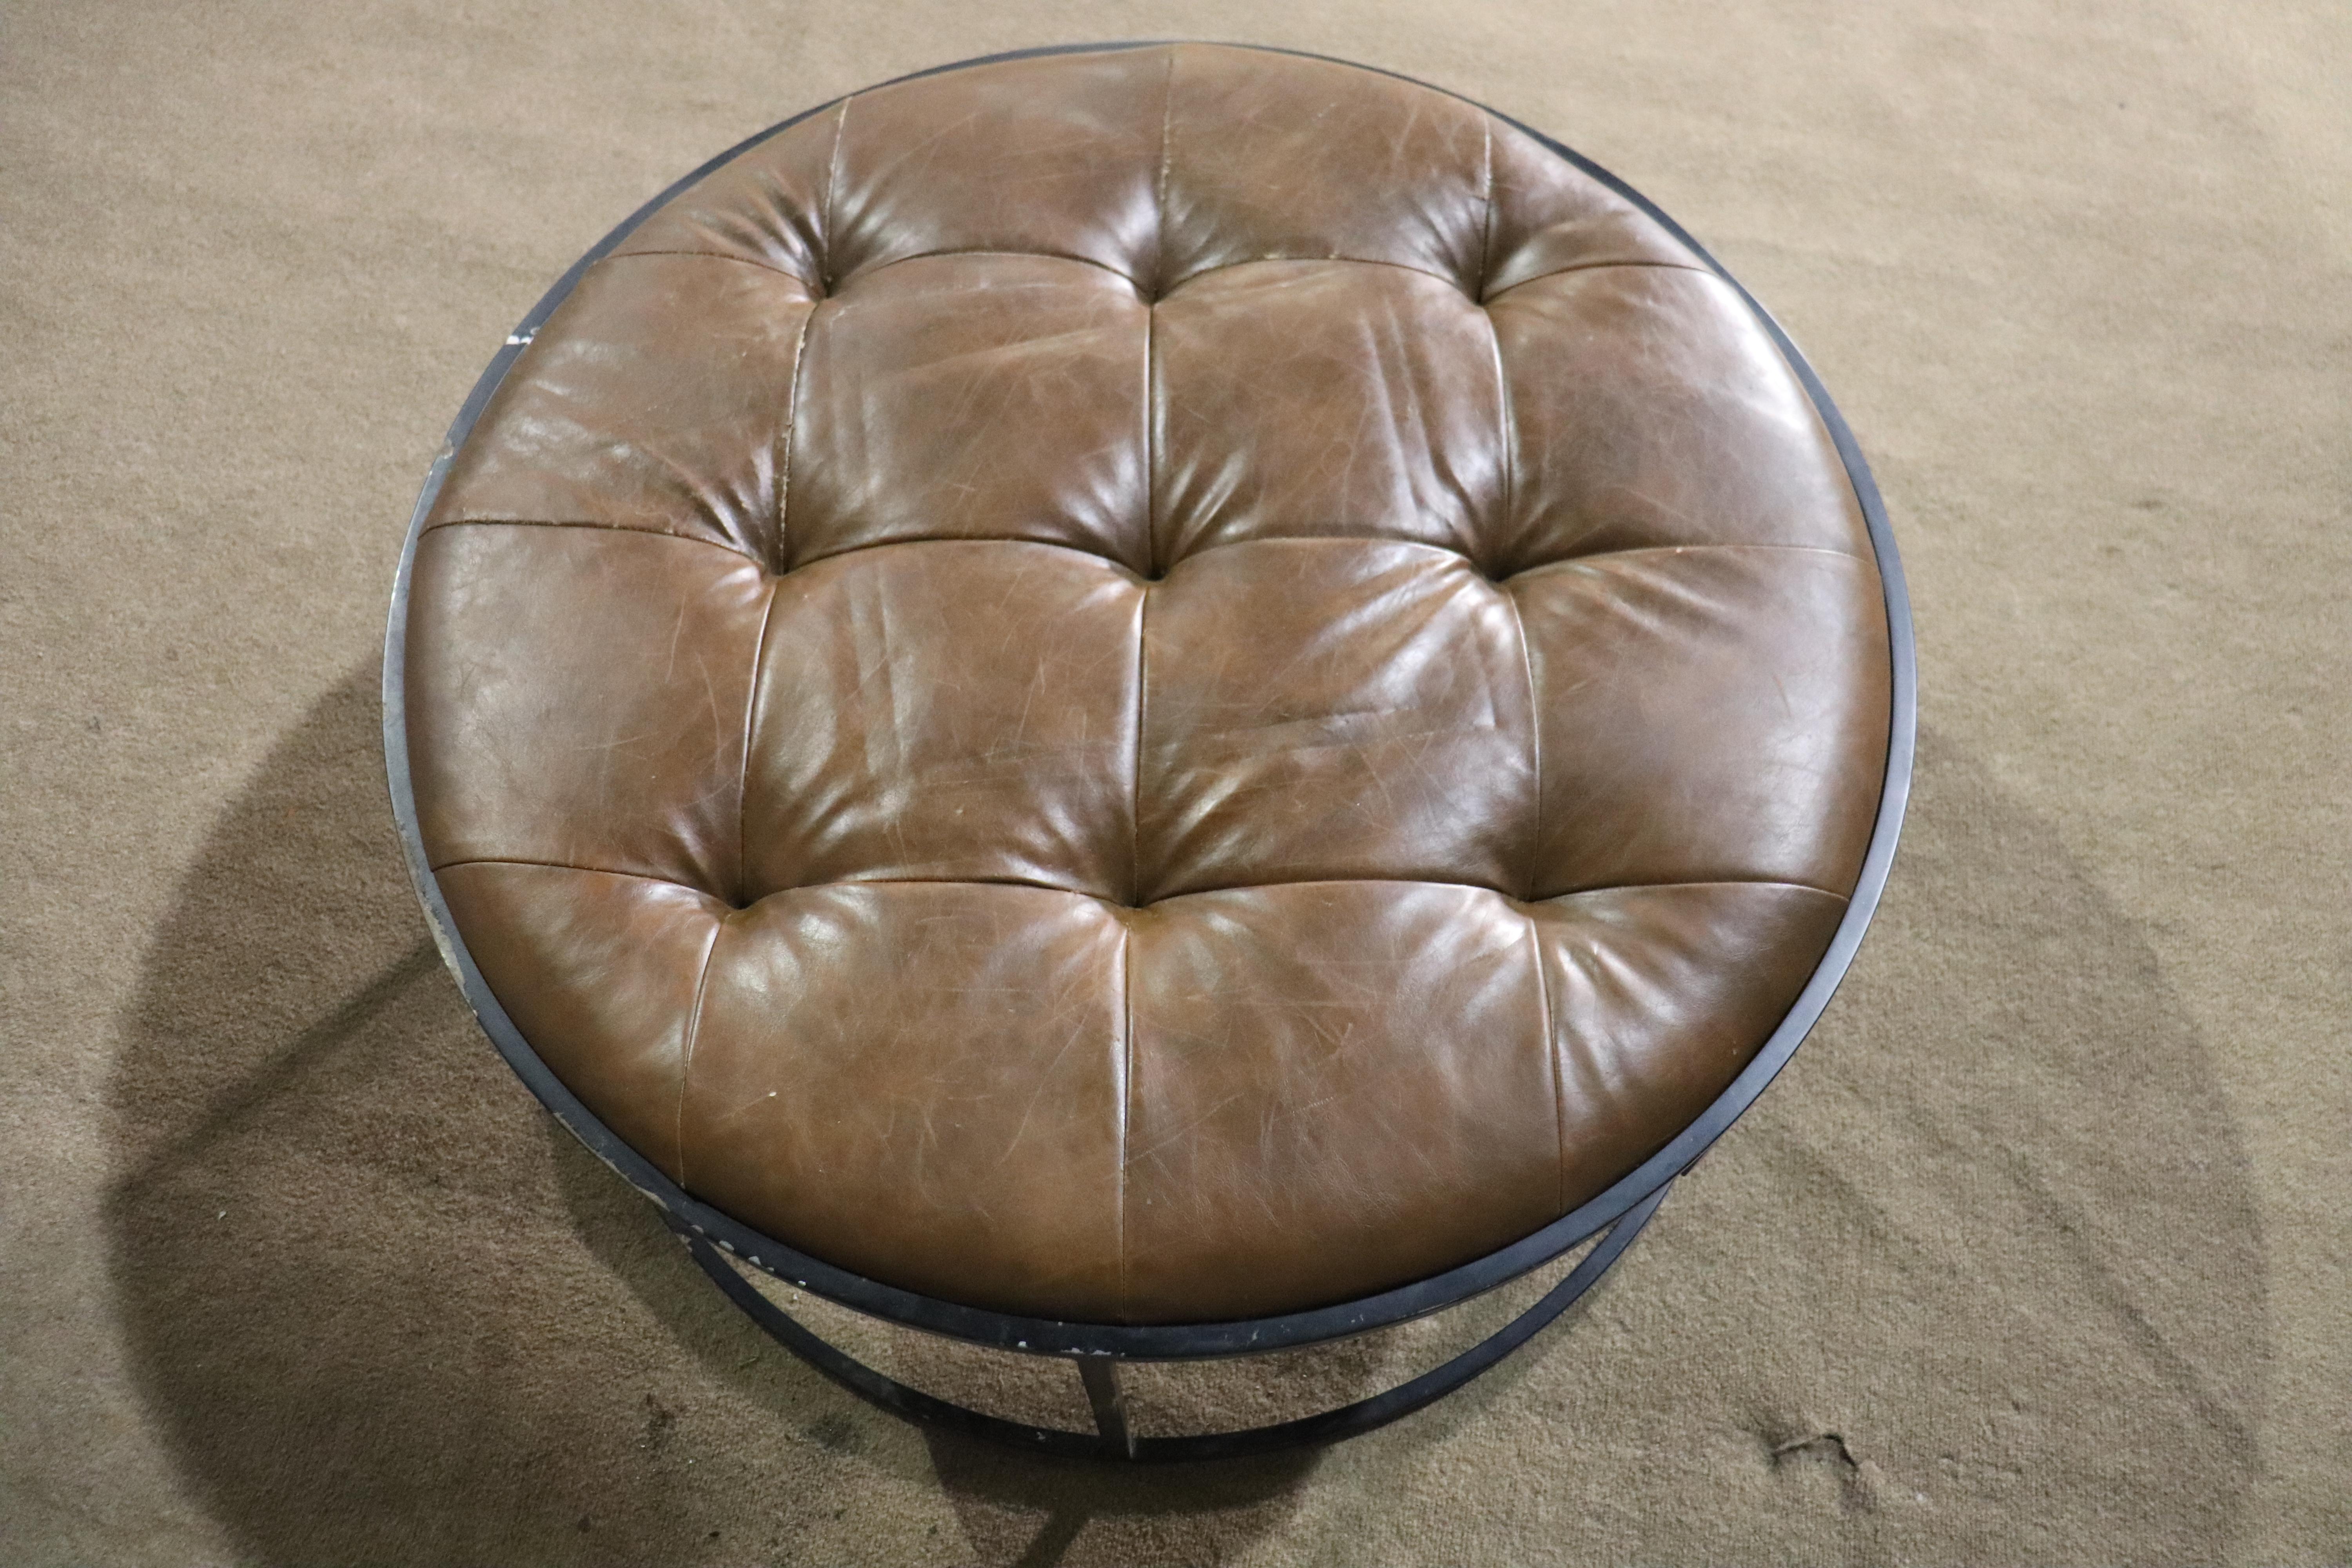 Large 3 foot wide ottoman with tufted leather top and strong iron base. Great age and patina throughout the leather. Can be used as a table. Made for the Millwork Holdings Company NYC.
Please confirm location NY or NJ